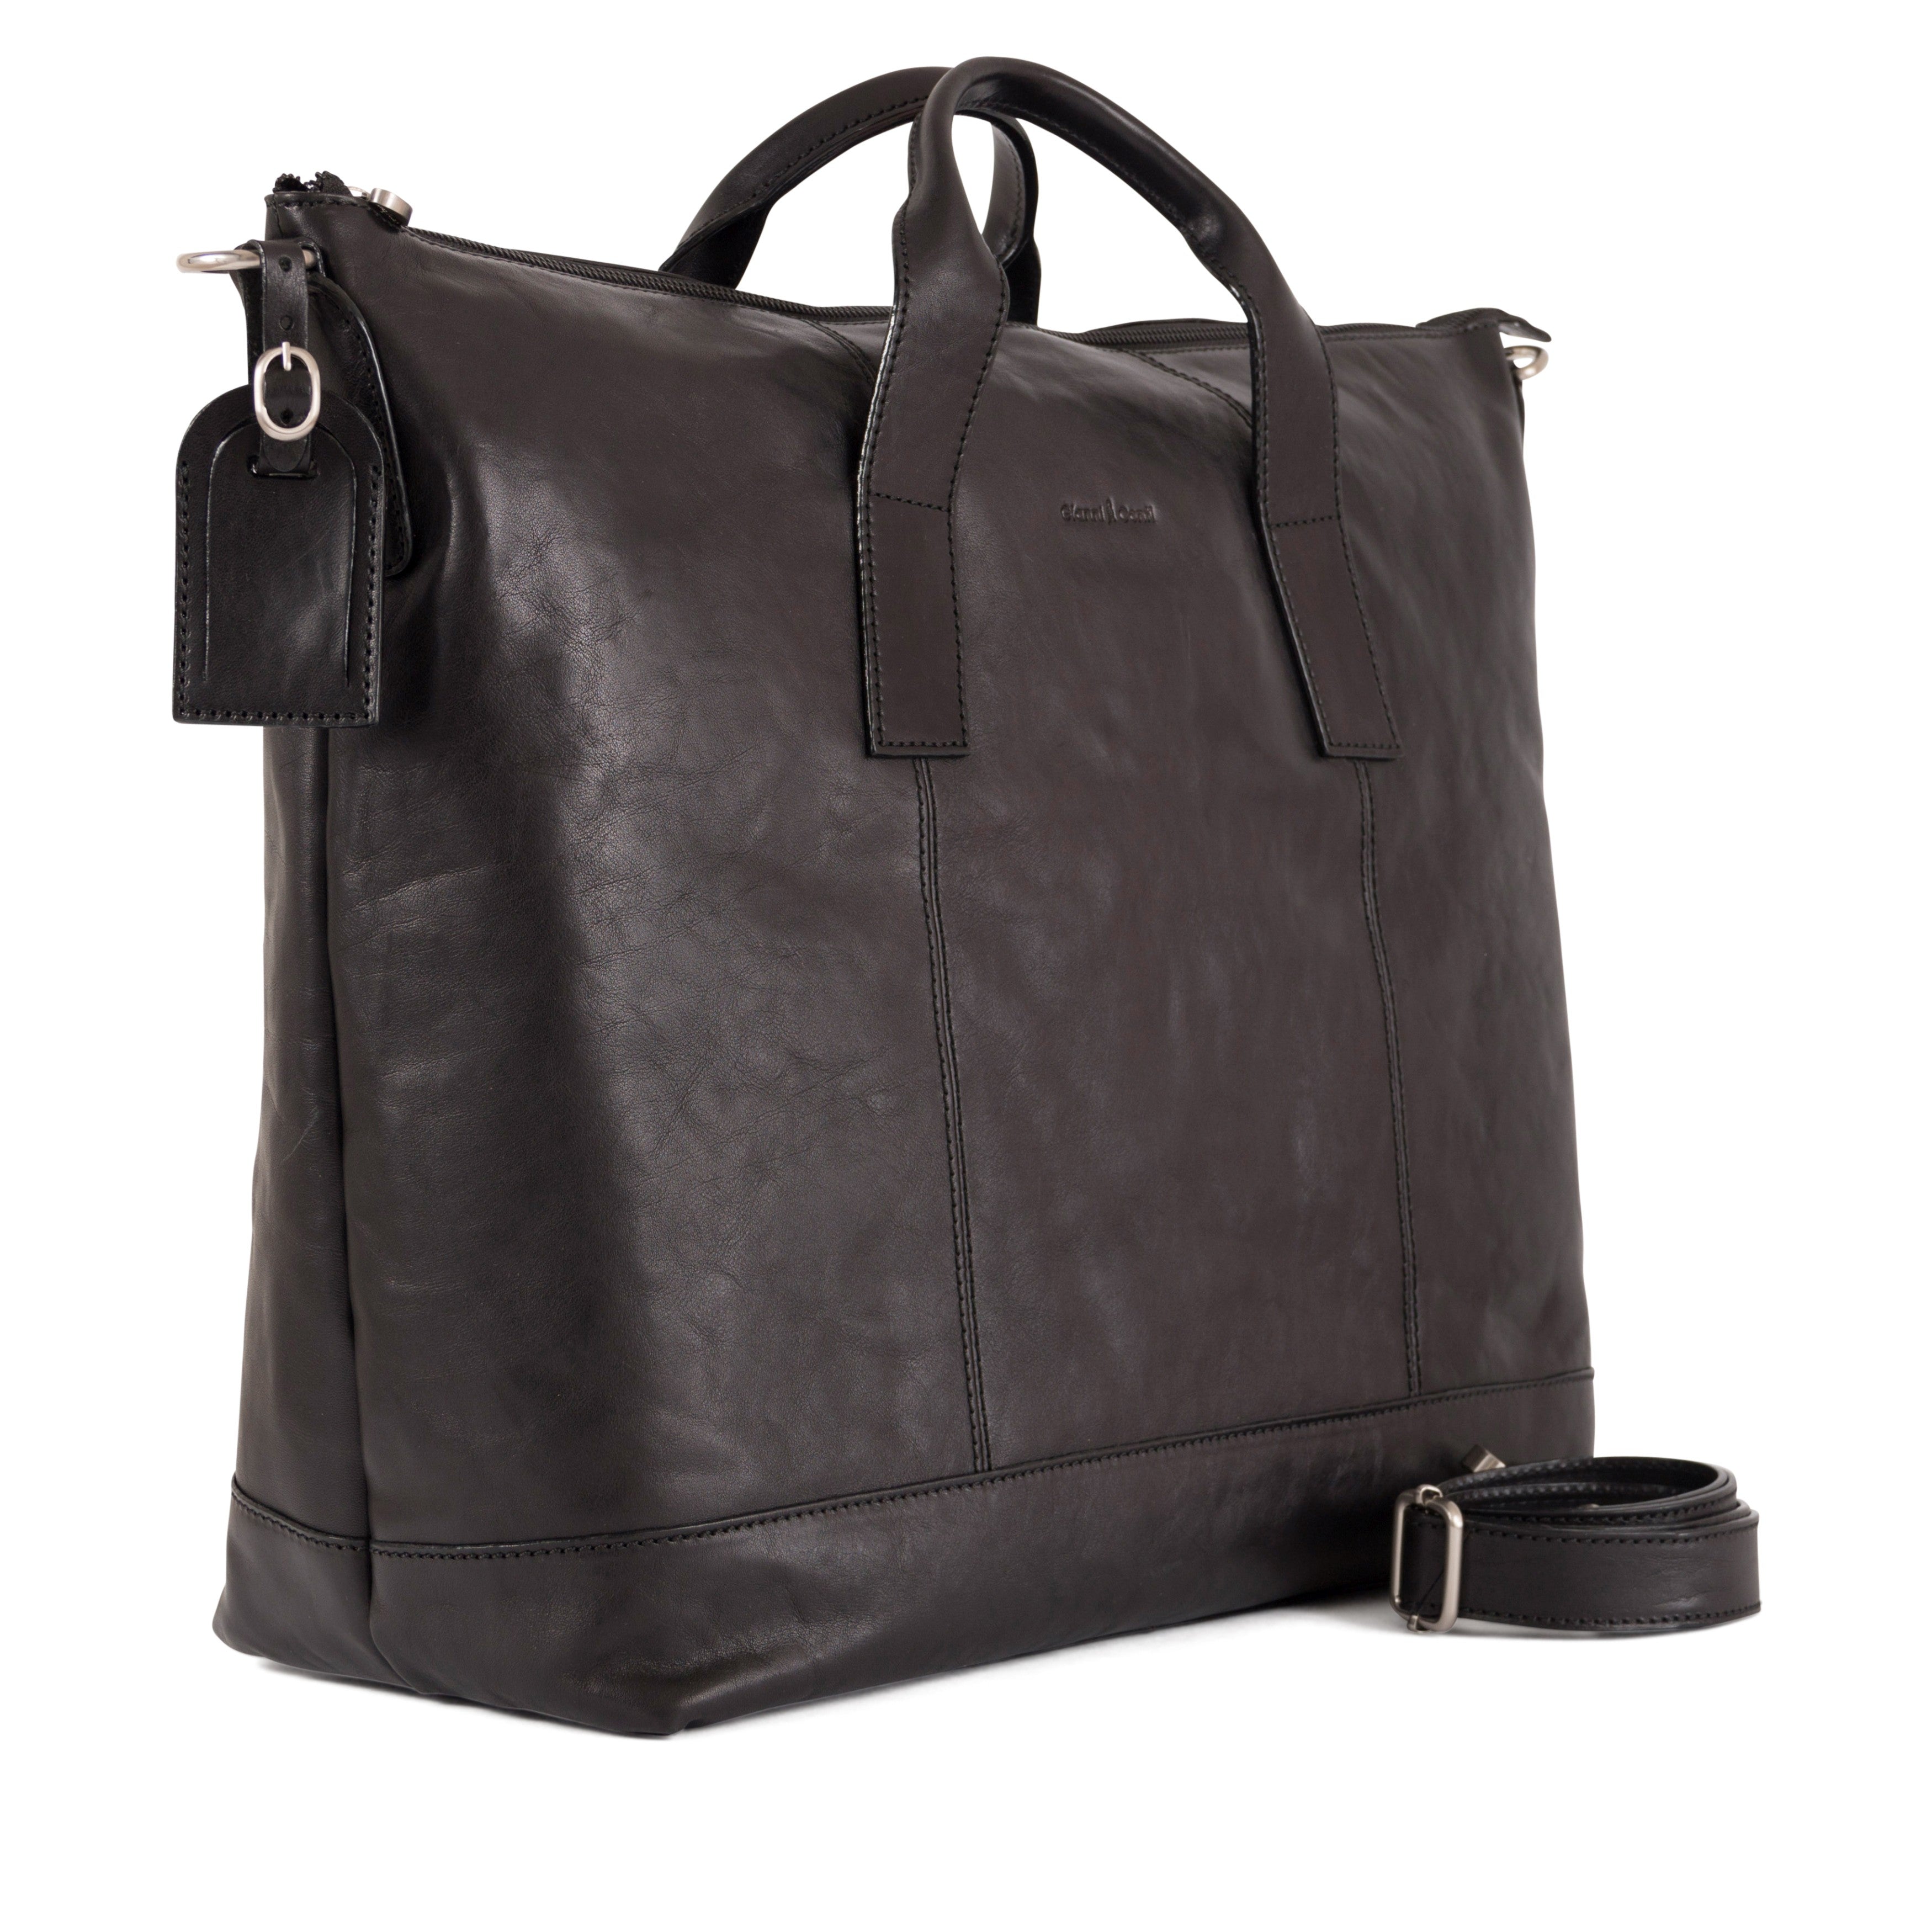 Apollo Travel Bag by Gianni Conti - Vegetable-Tanned Leather